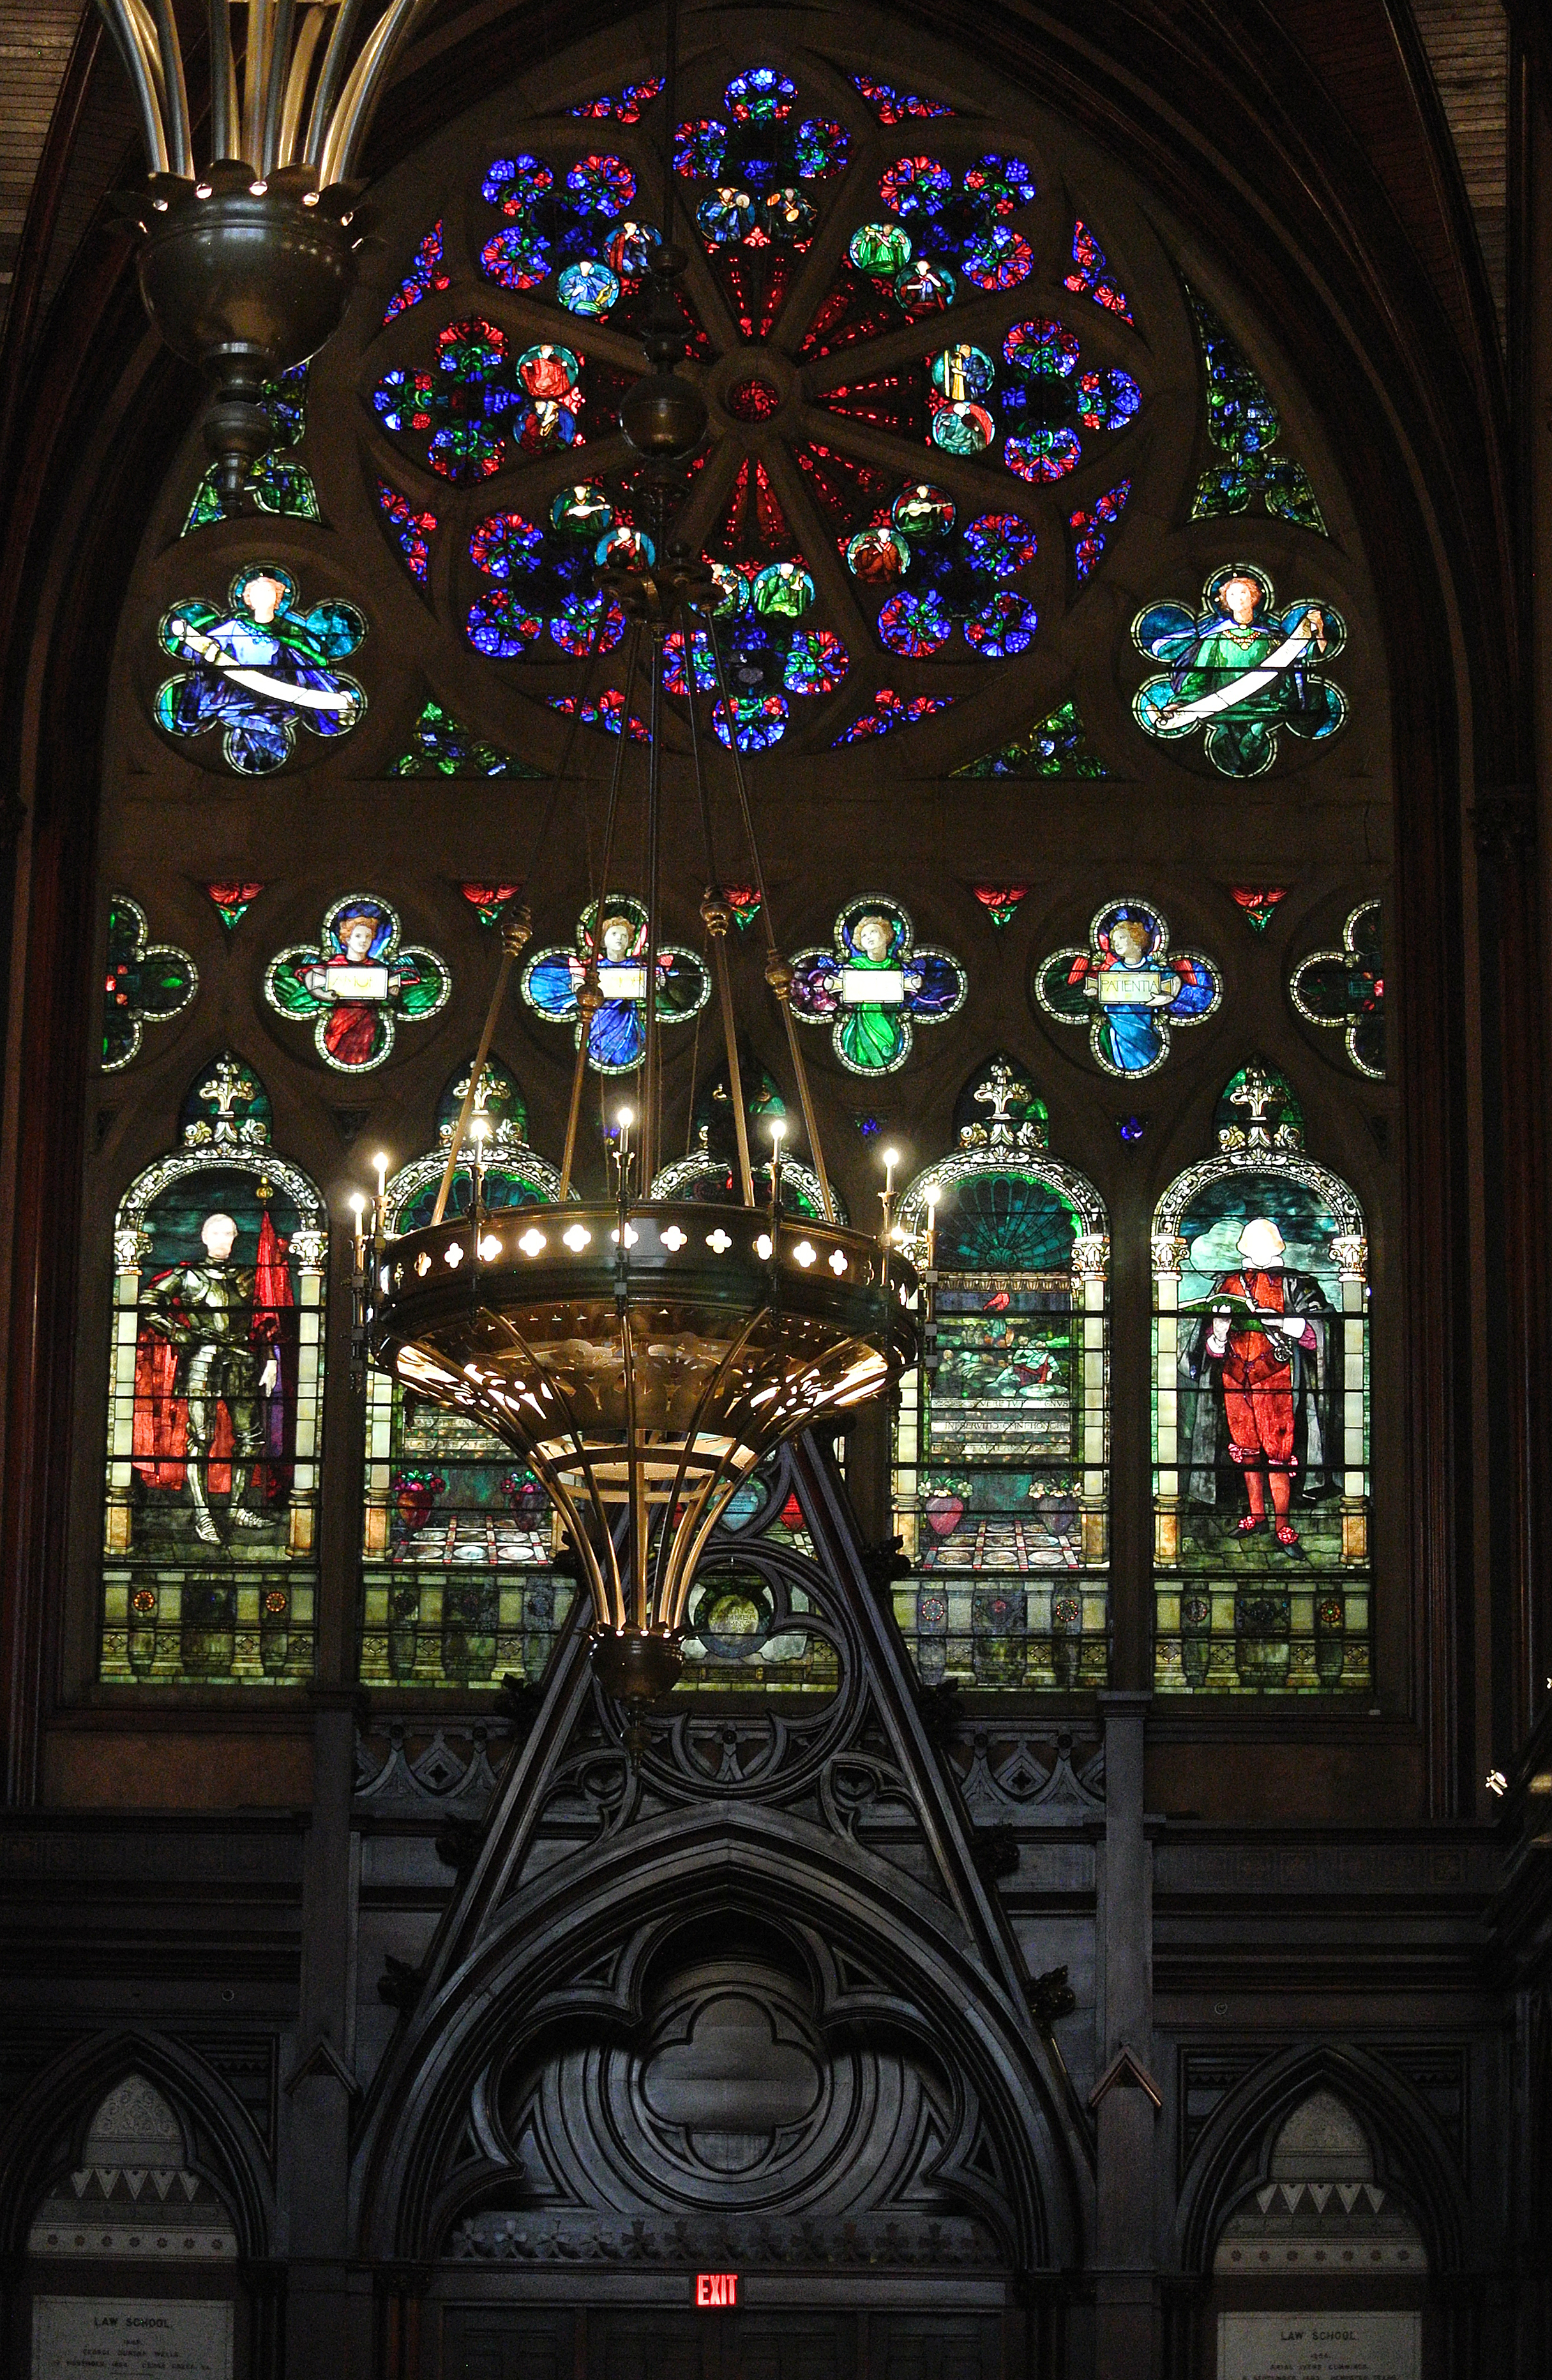 Stained glass: an introduction · V&A